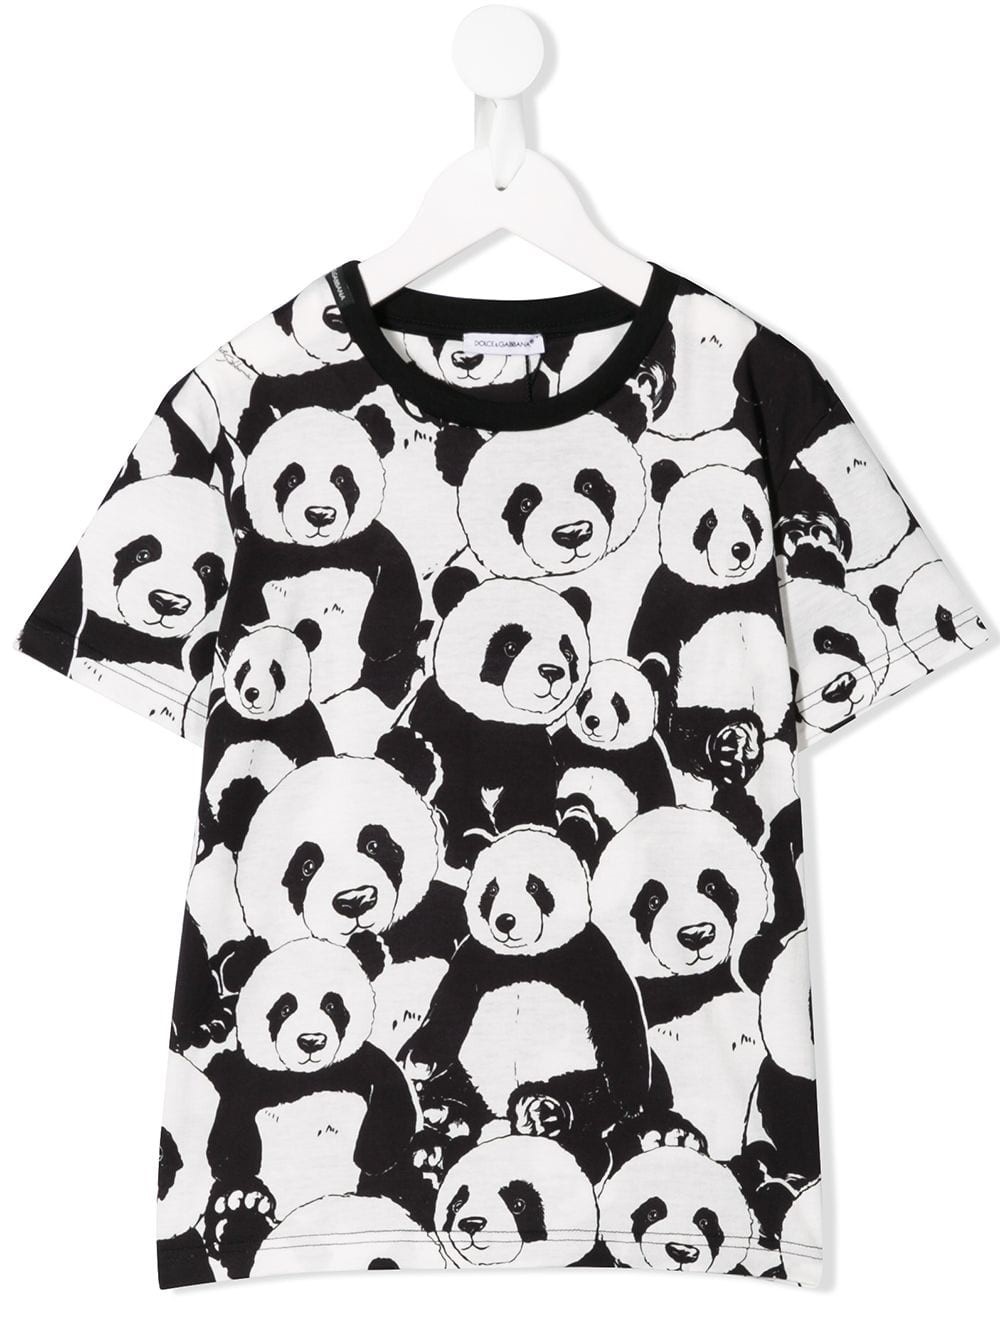 dolce & gabbana kids PANDA T-SHIRT 8/12Y available on  -  28588